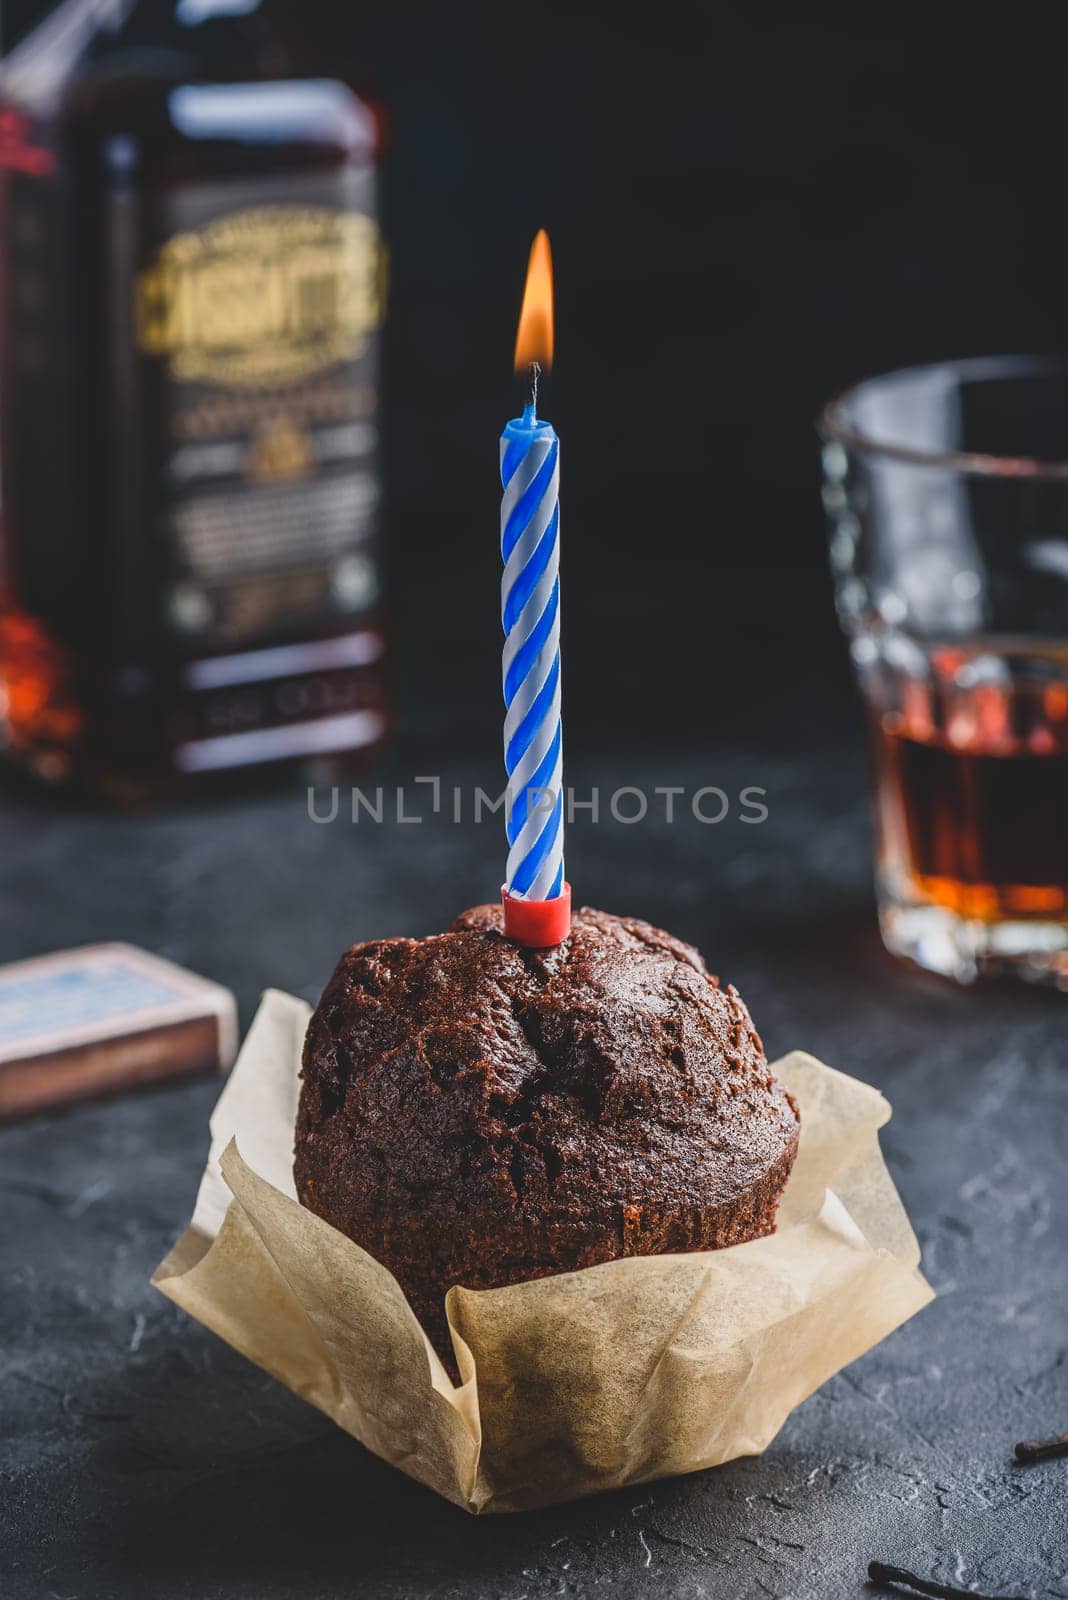 Chocolate muffin with birthday candle by Seva_blsv